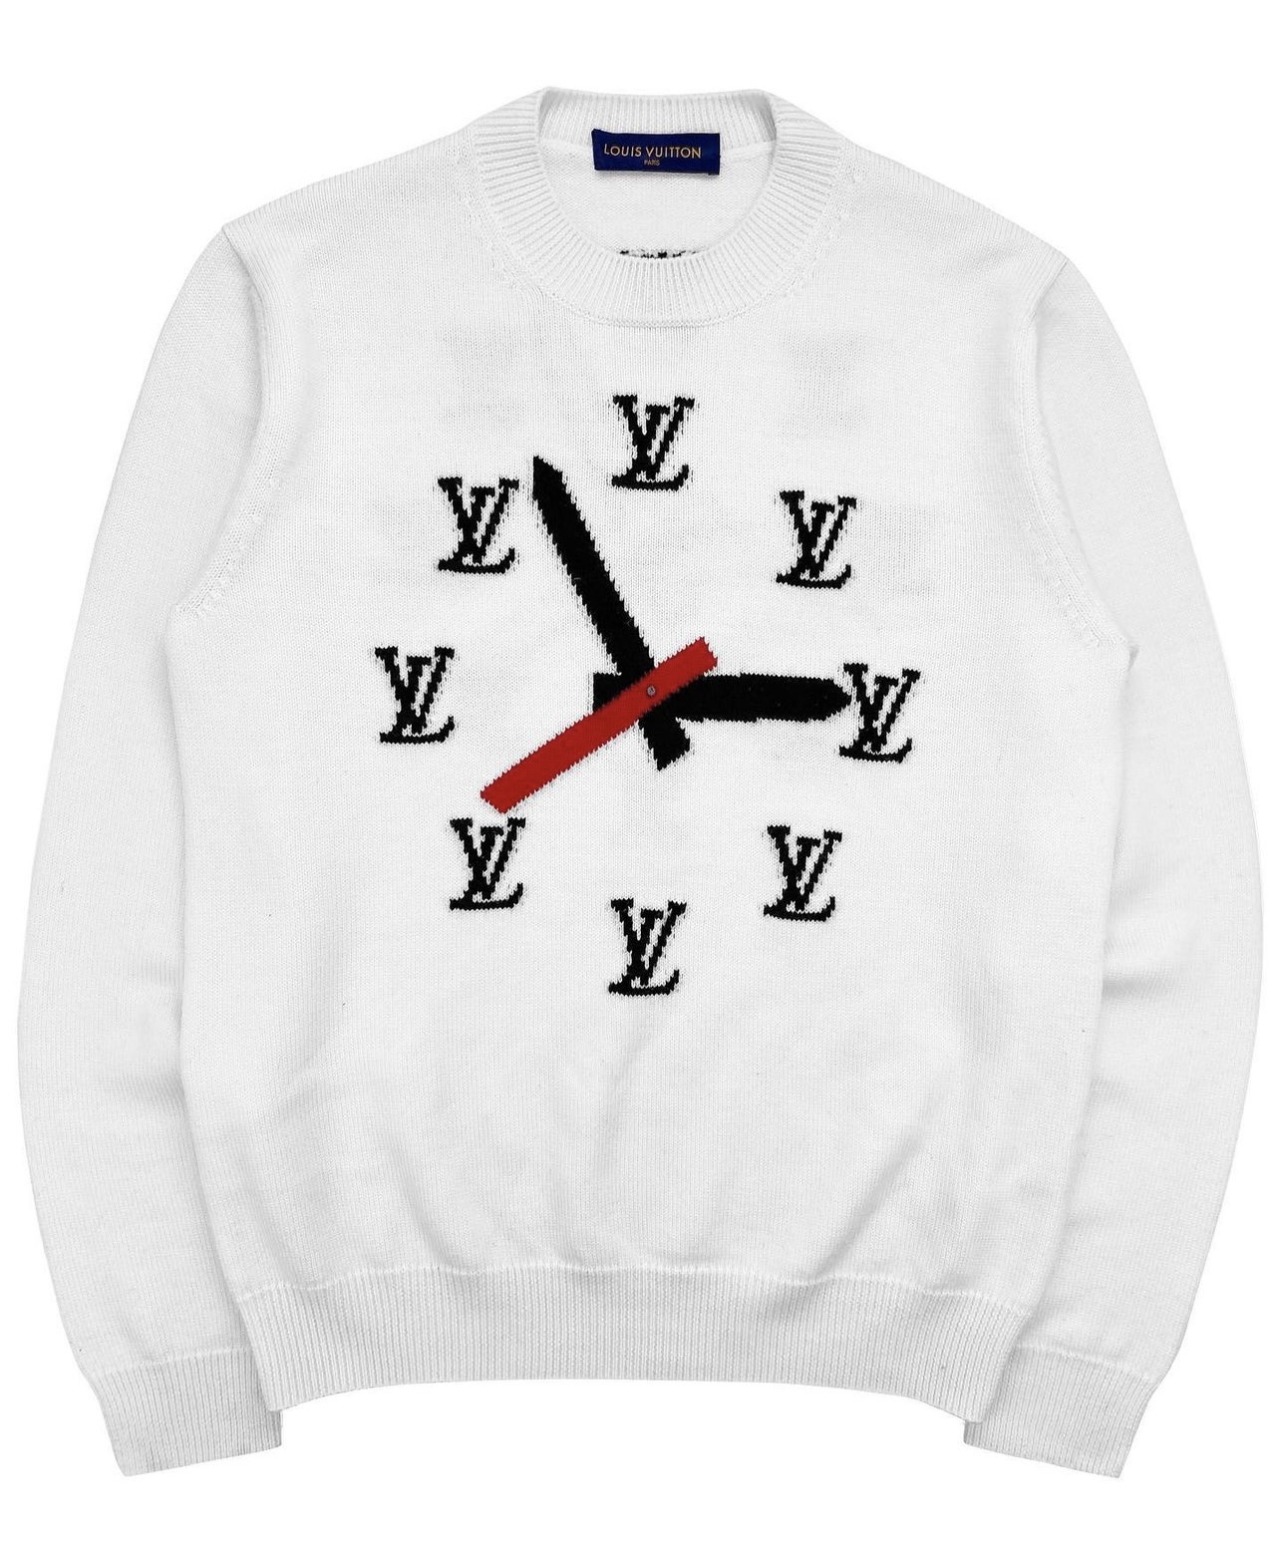 Louis Vuitton Letters White Sweater